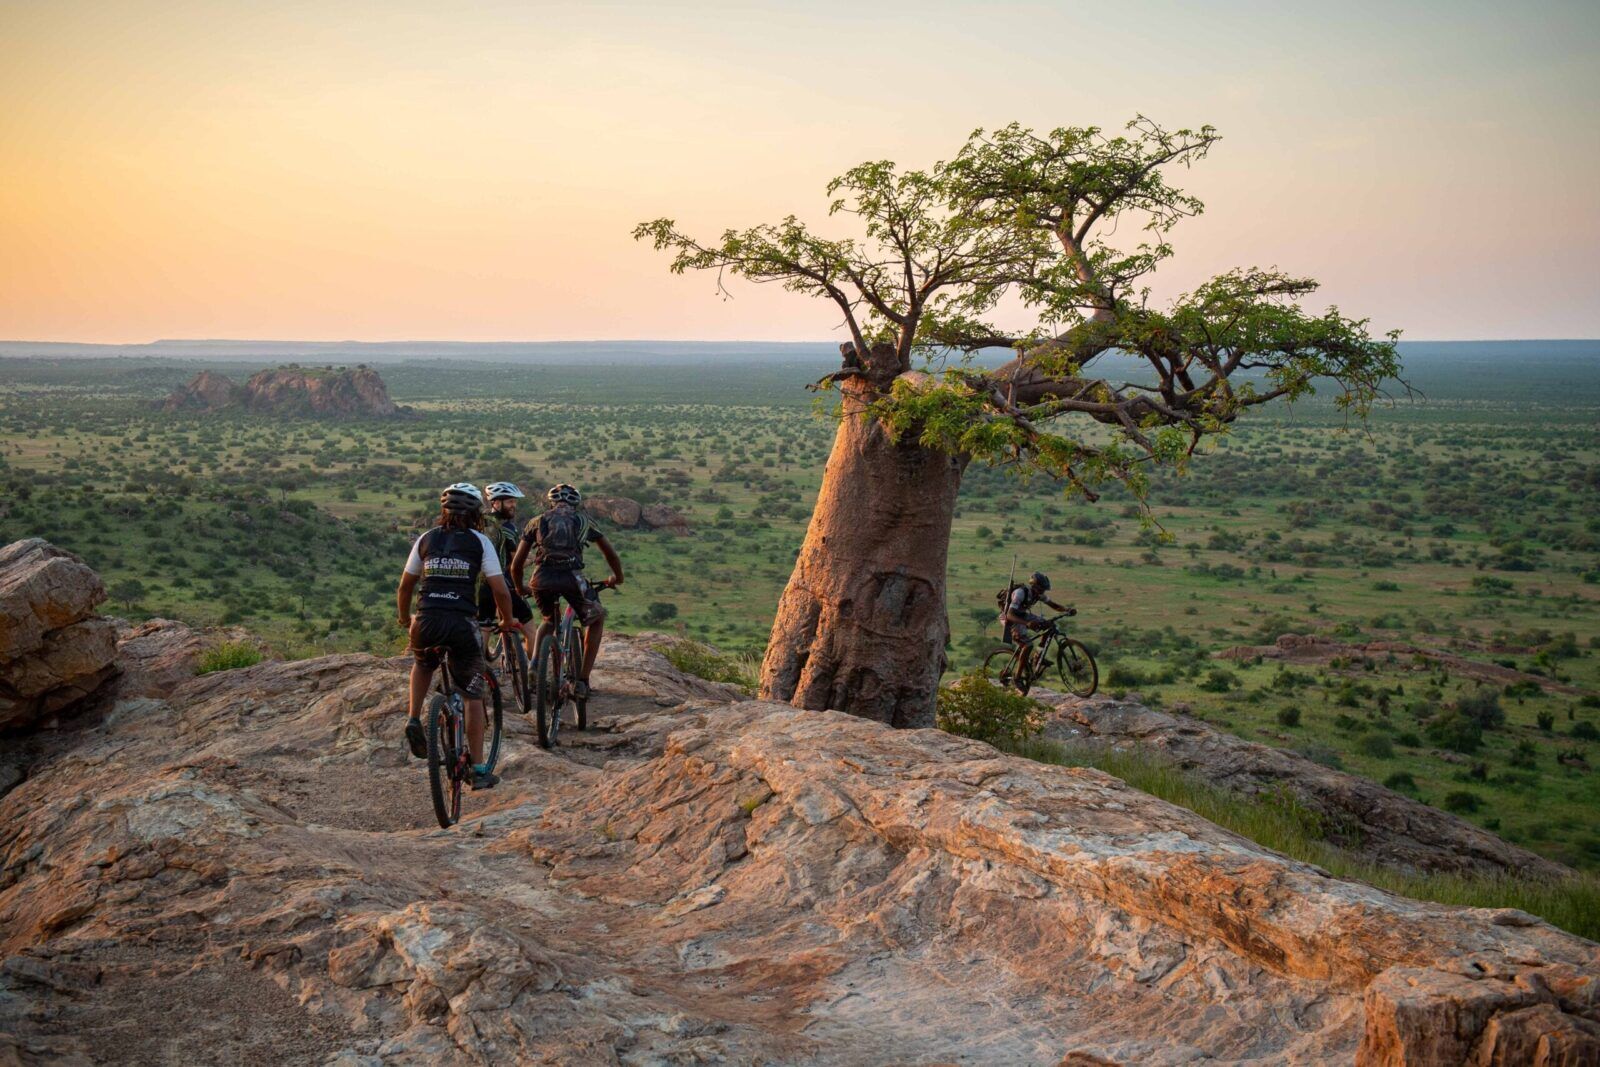 You are Crazy about Cycling in Africa